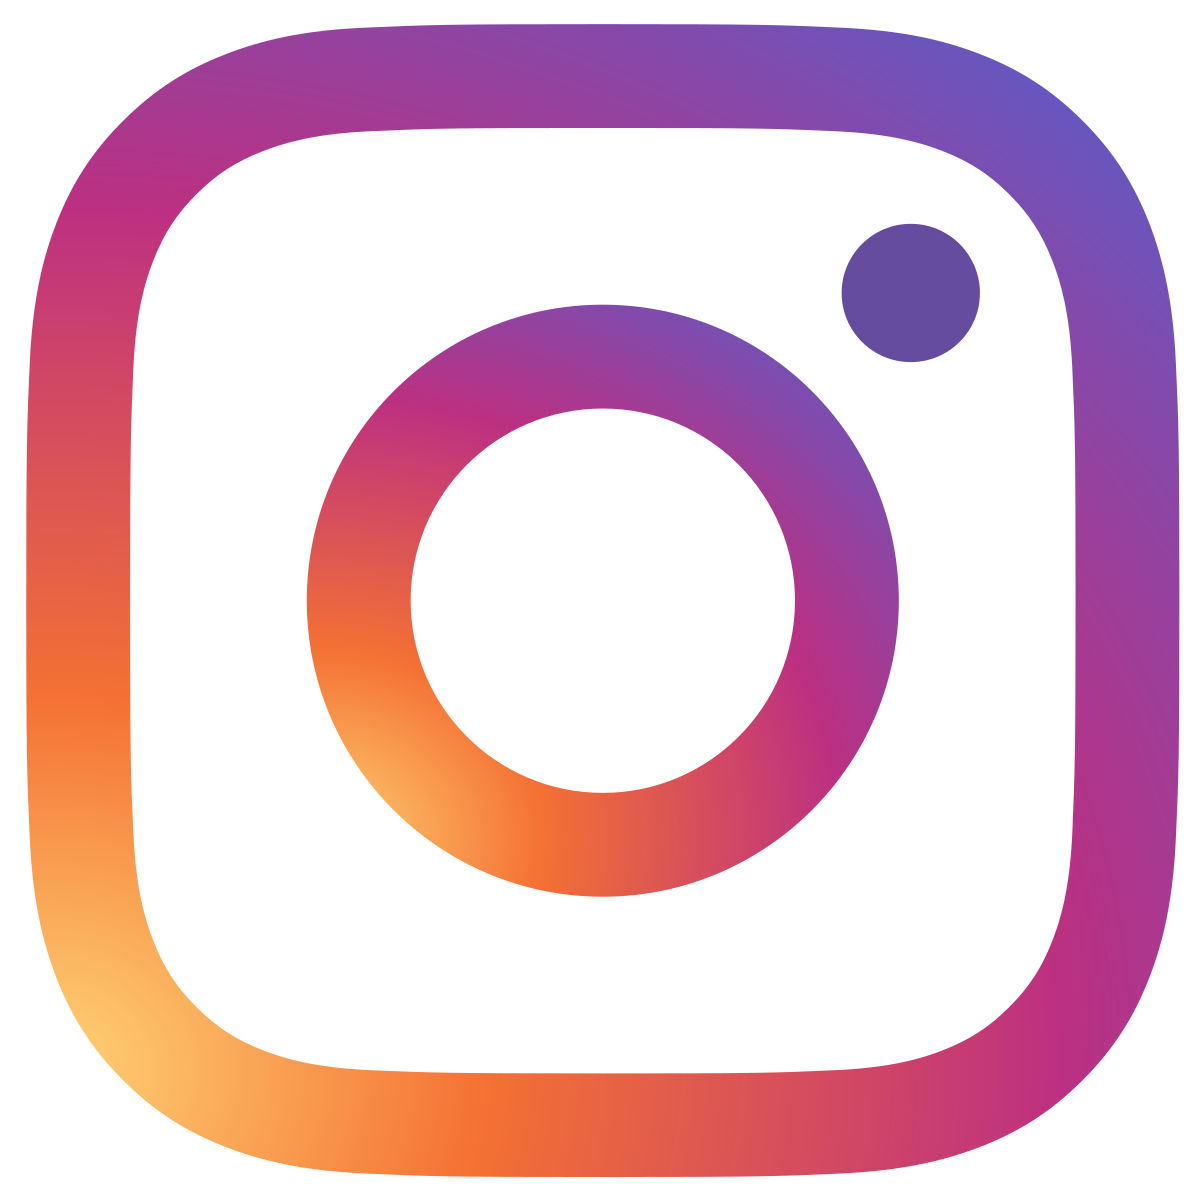 the Instagram logo, which is a simple cartoon of a camera